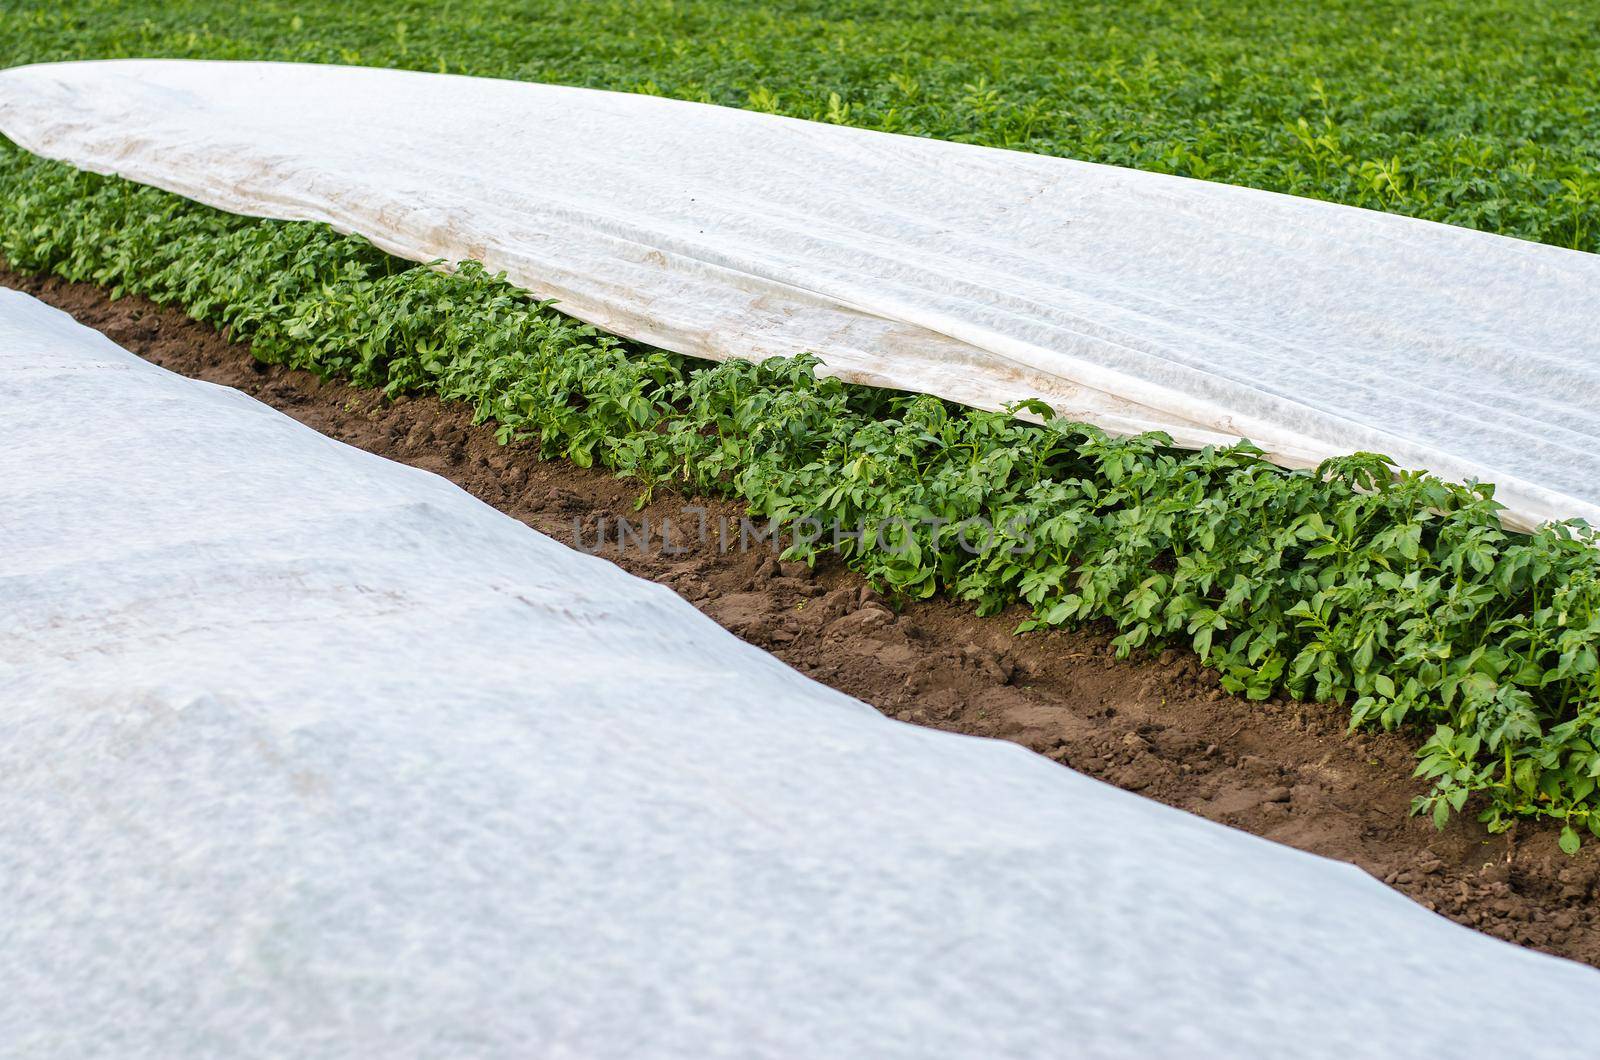 Potato plantation covered with agrofibre. Opening of young potato bushes as it warms. Greenhouse effect for care and protection. Hardening of plants in late spring. Agroindustry, farming. by iLixe48